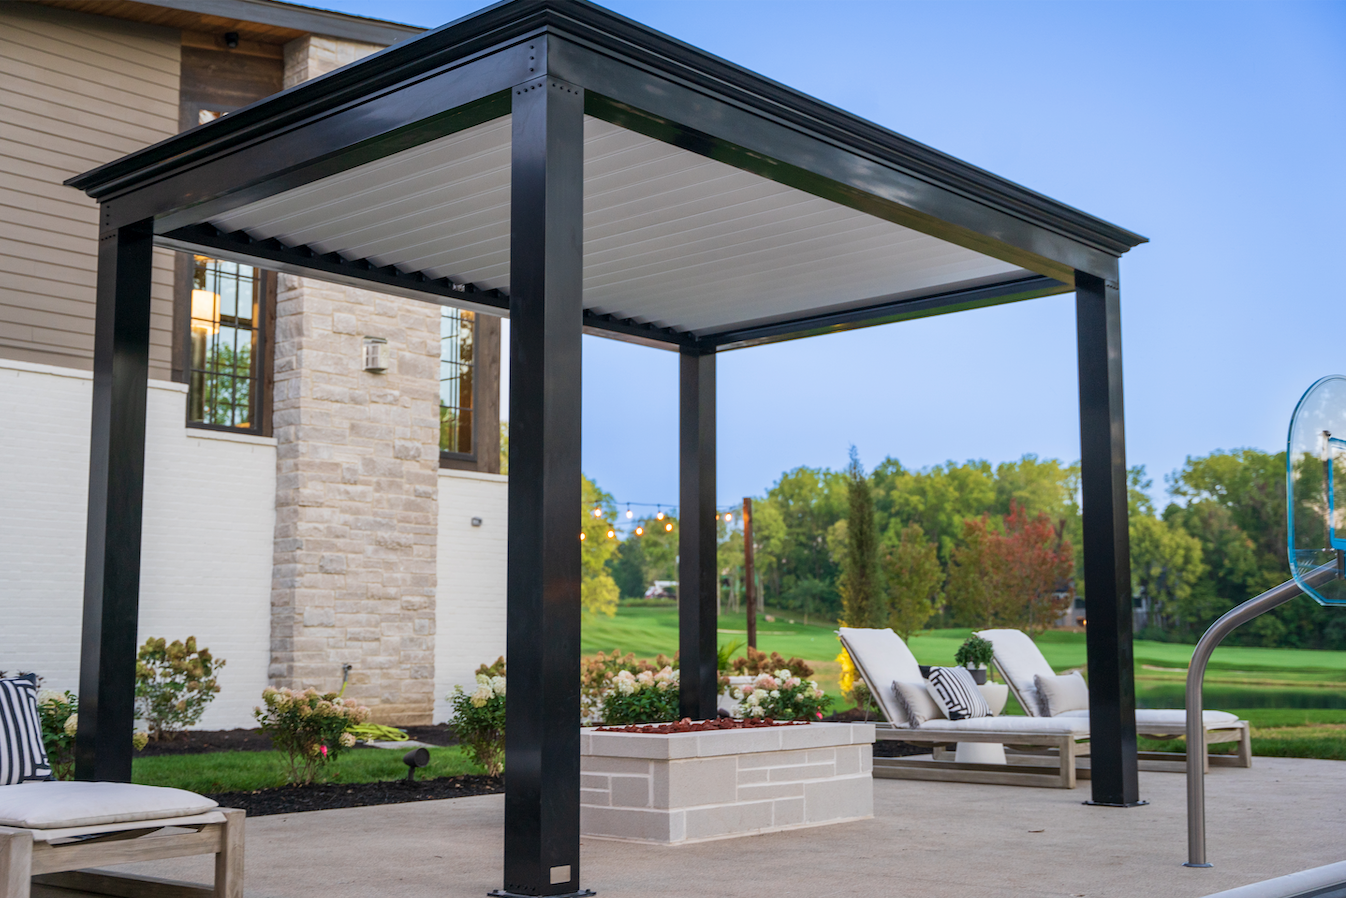 Black Pergola By Gardens In Outdoor Space